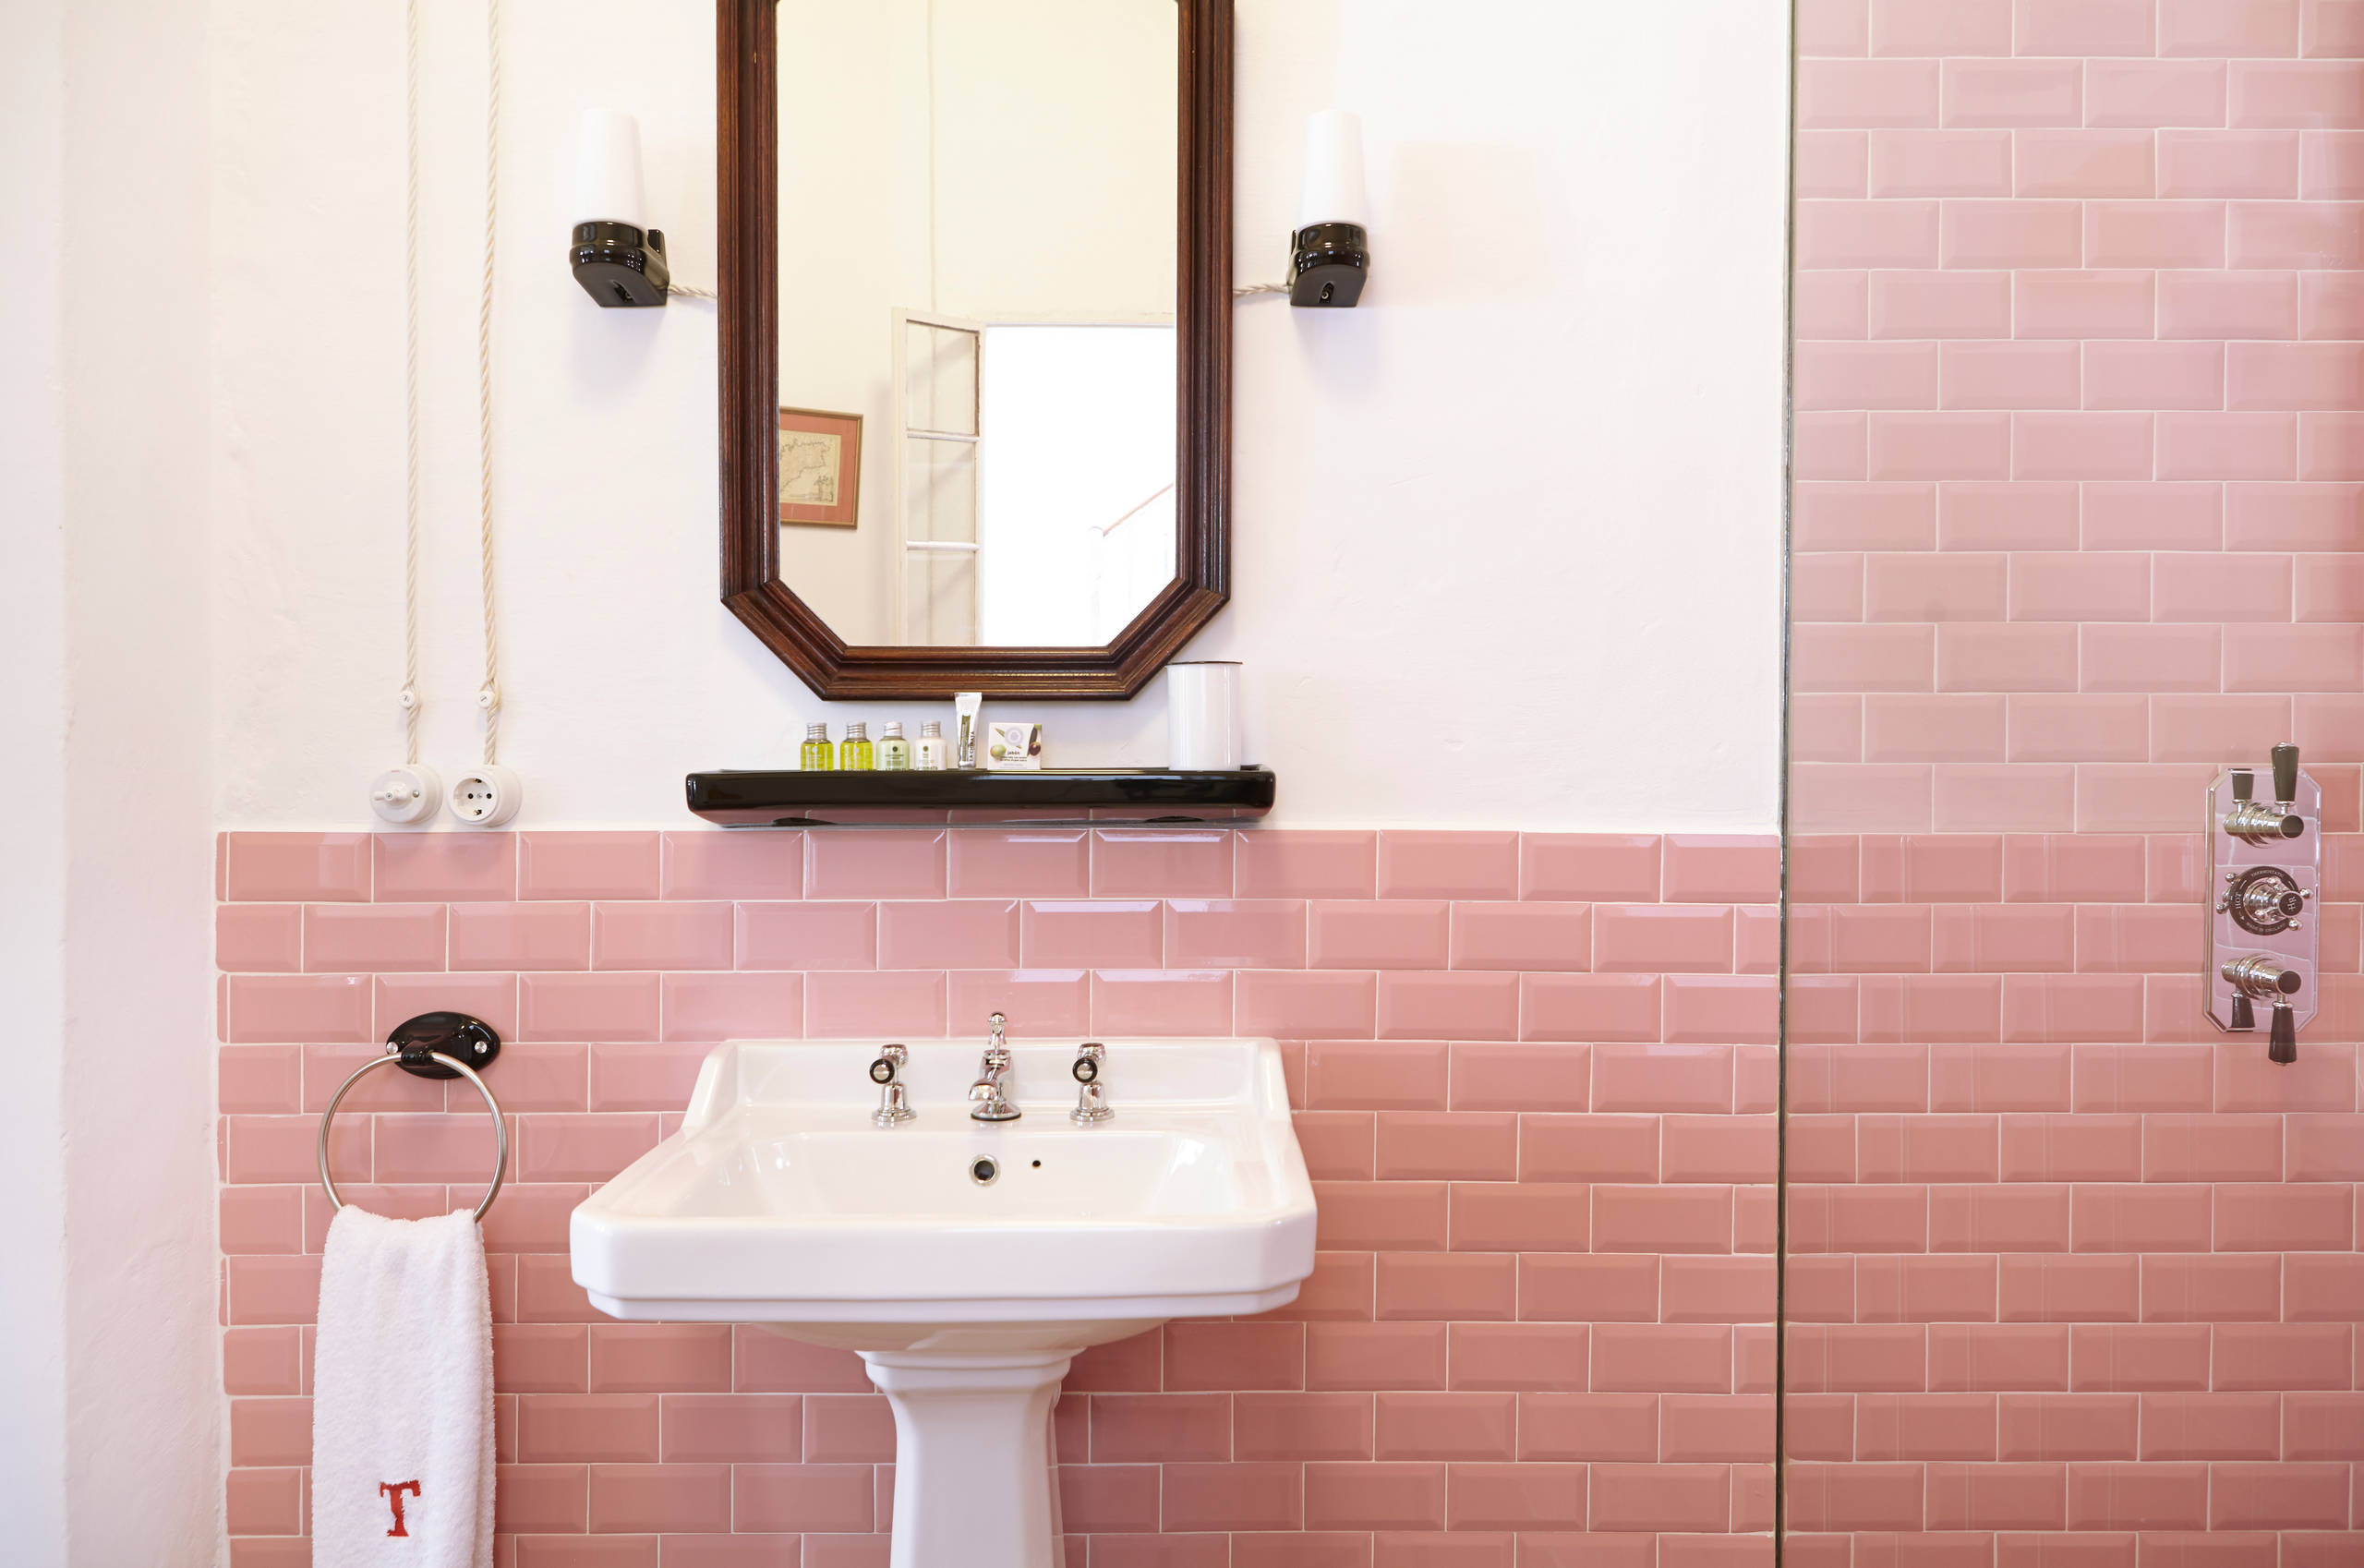 Wonderful pink pedestal sink for sale 75 Beautiful Pink Bathroom With A Pedestal Sink Pictures Ideas August 2021 Houzz